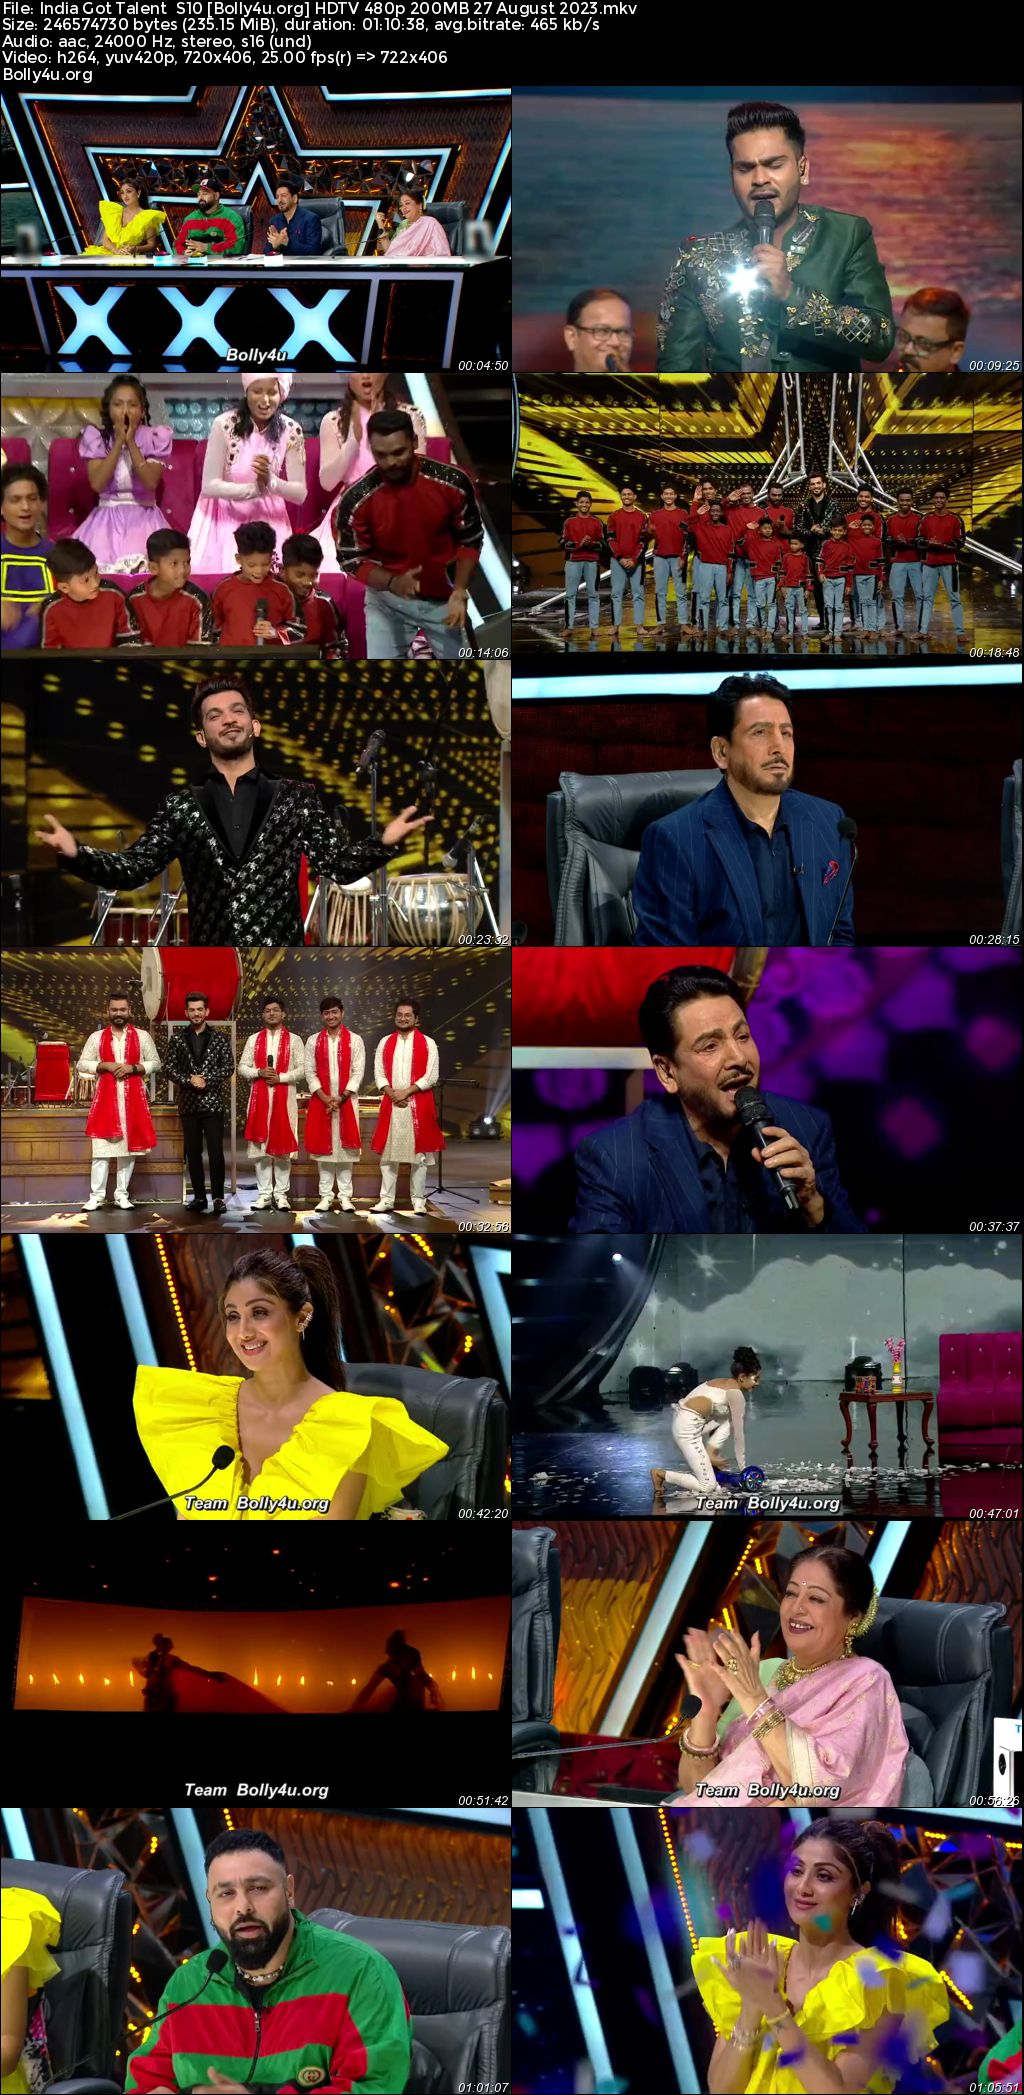 India Got Talent S10 HDTV 480p 200MB 27 August 2023 Download